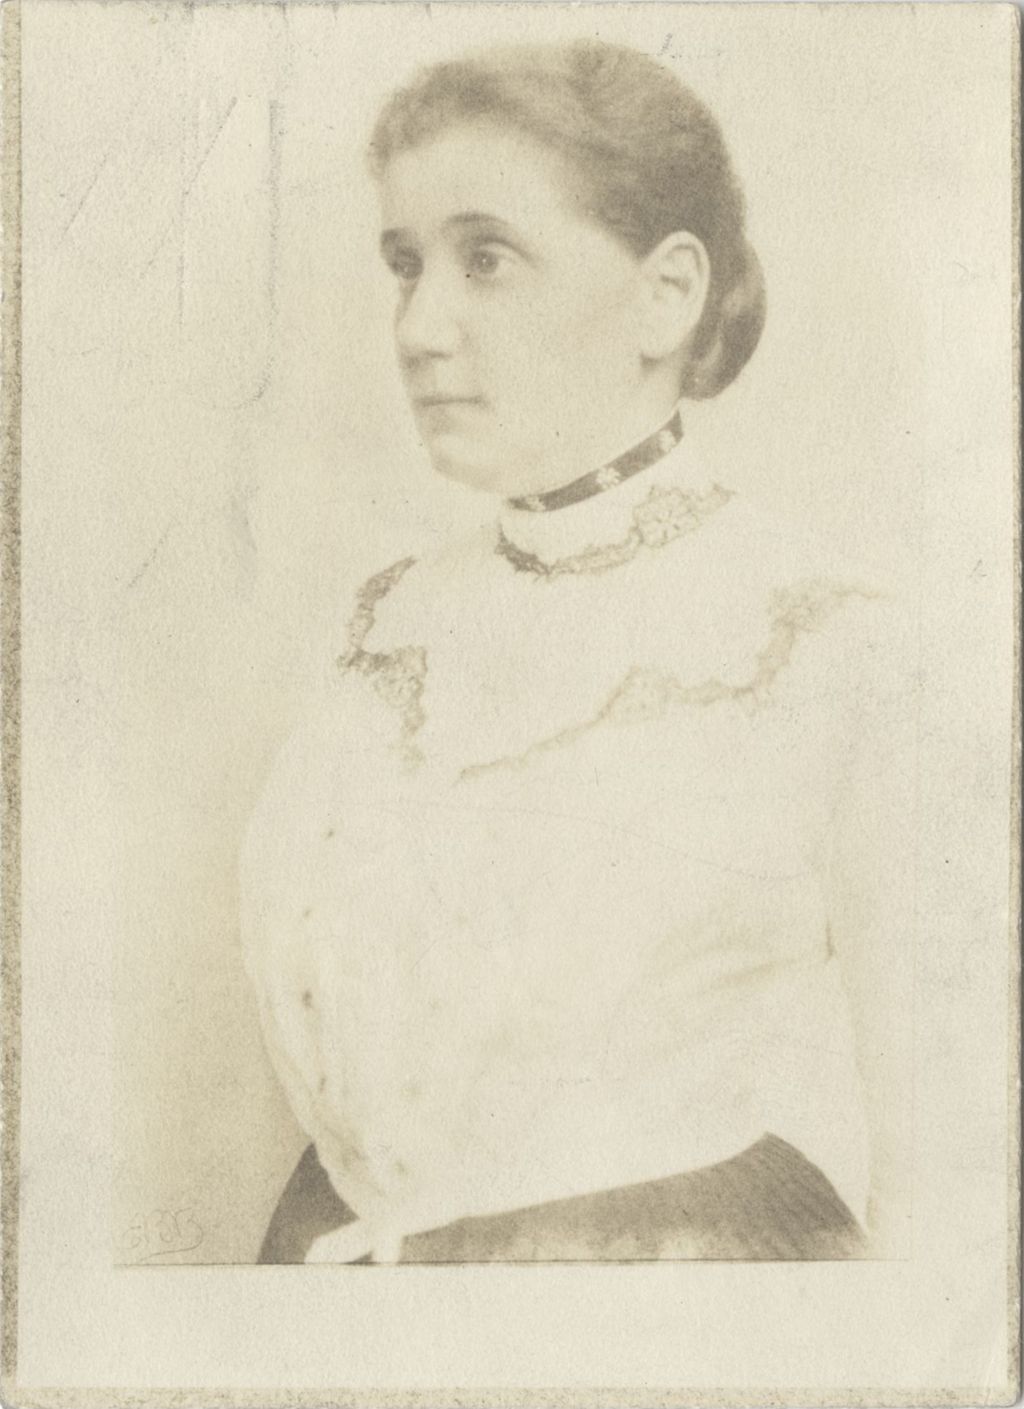 Waist-up 3/4 portrait of Jane Addams wearing a high-necked light colored blouse